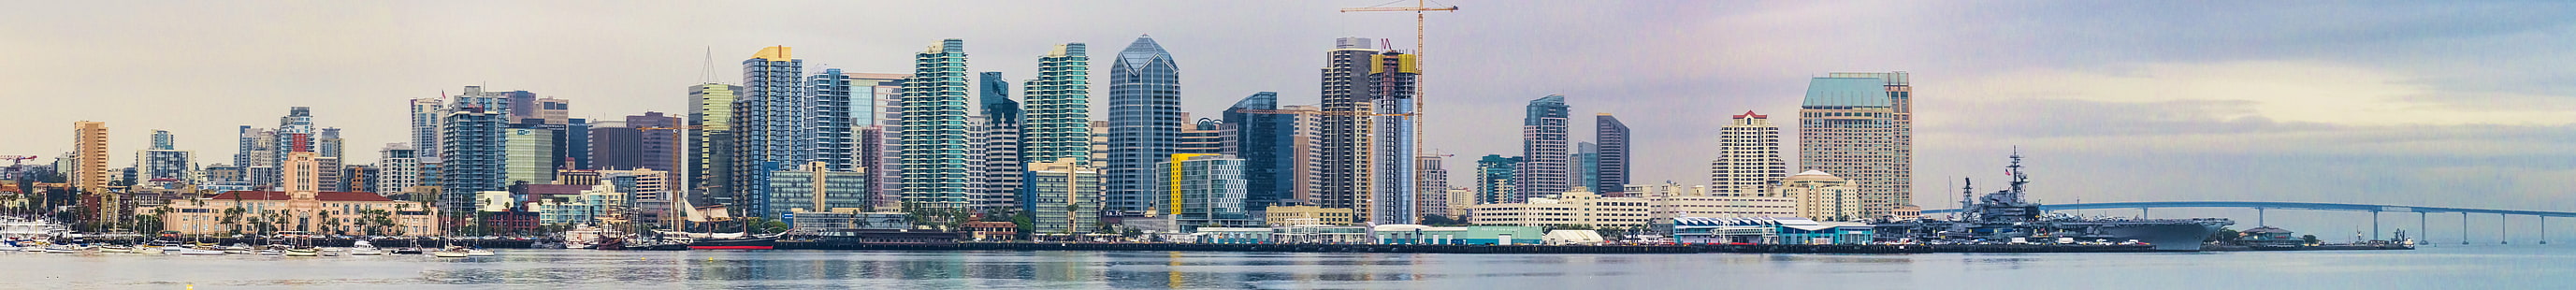 City buildings near bodies of water photo shot during daytime, san diego, california, san diego, california, San Diego, California, California  City, buildings, bodies of water, shot, daytime, San Diego, composition, travel photography, Adobe Lightroom, Photographer, Cityscape, panorama, digital photography, California, Adobe Photoshop, World, international, Topaz, Clarity, photographic artist, photographic art, Adobe, Stock  photography, 500px, architecture, Flickr, tourism, Downtown, urban Skyline, skyscraper, urban Scene, famous Place, city, river, downtown District, built Structure, panoramic, building Exterior, tower, office Building, HD wallpaper HD wallpaper